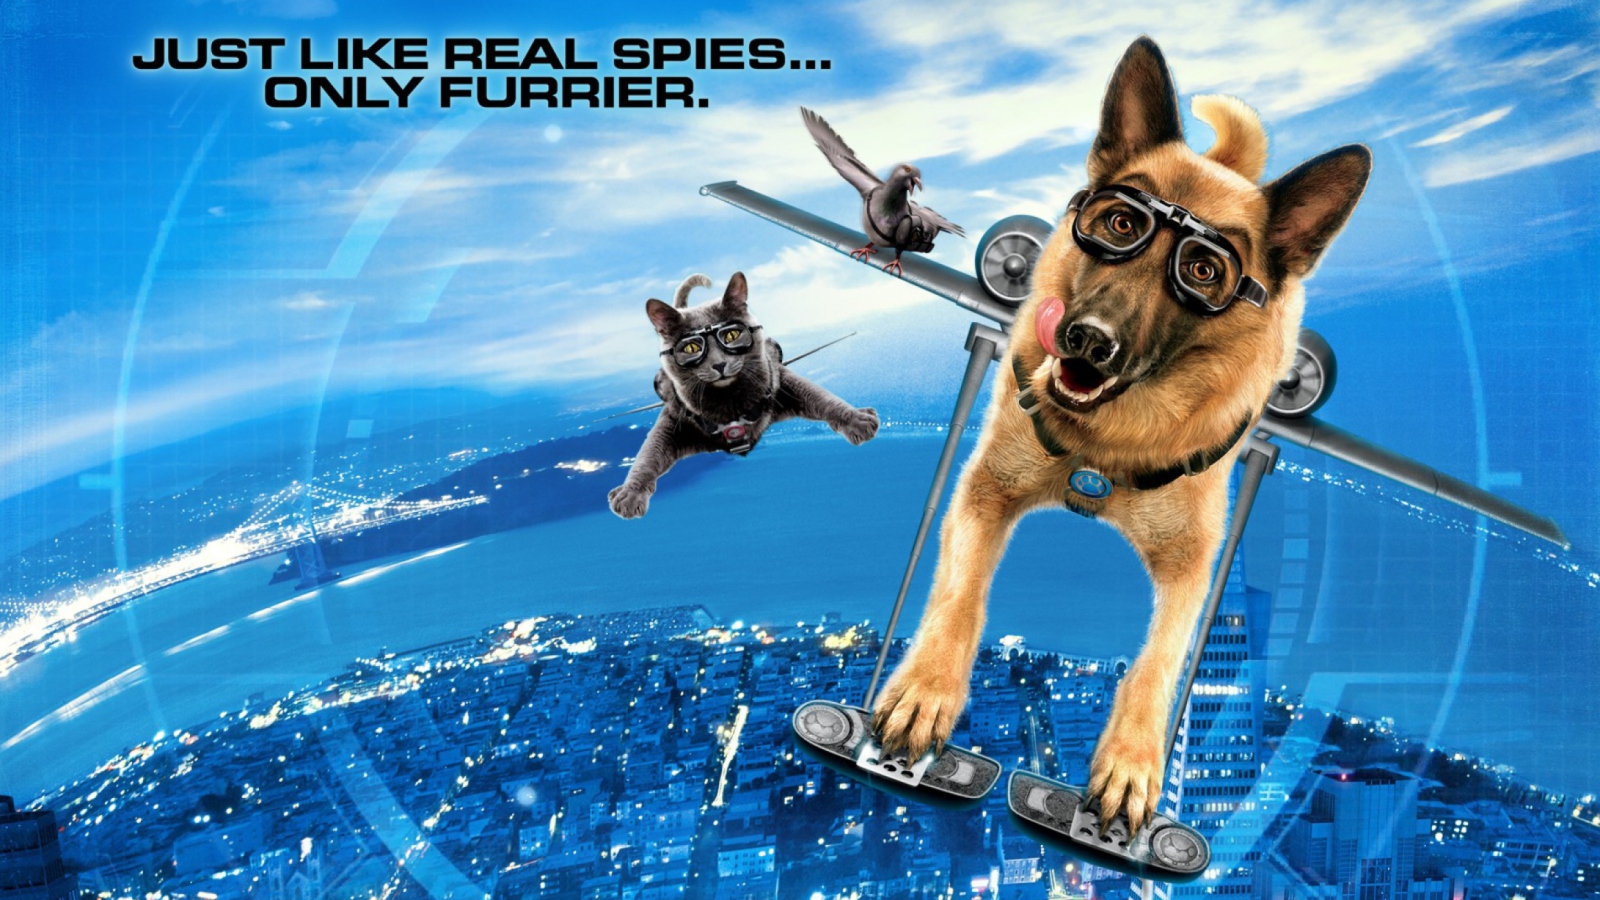 Cats & Dogs: The Revenge of Kitty Galore wallpaper 1600x900